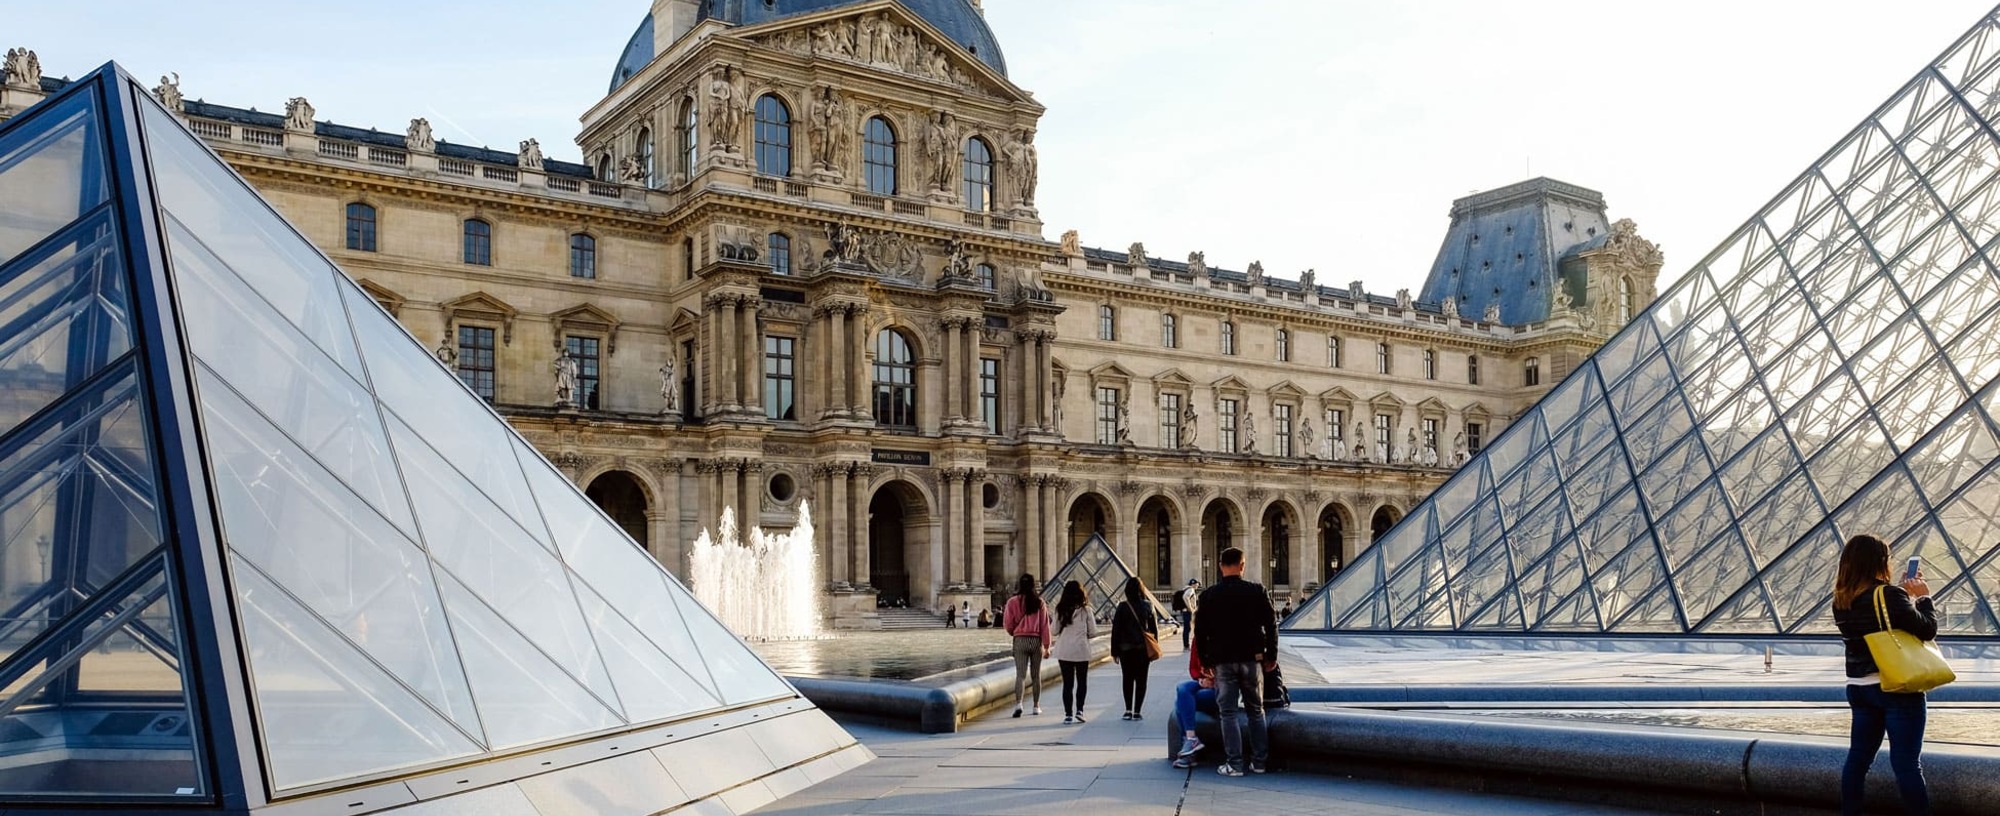 <div id="carrousel_content">
<div class="content">
<div class="title">
<h1>Private tours in France<br />
with expert guides</h1>
</div>

<div class="desc">All our tours are a unique opportunity to enjoy Paris &amp; France and will help your follow your own interest at your place.</div>

<div><a class="btn btn-white btn-gen mt-4" href="/category/all-tours" style="font-size: 1rem;text-transform: none; border: none;">Discover our tours</a></div>
</div>
</div>